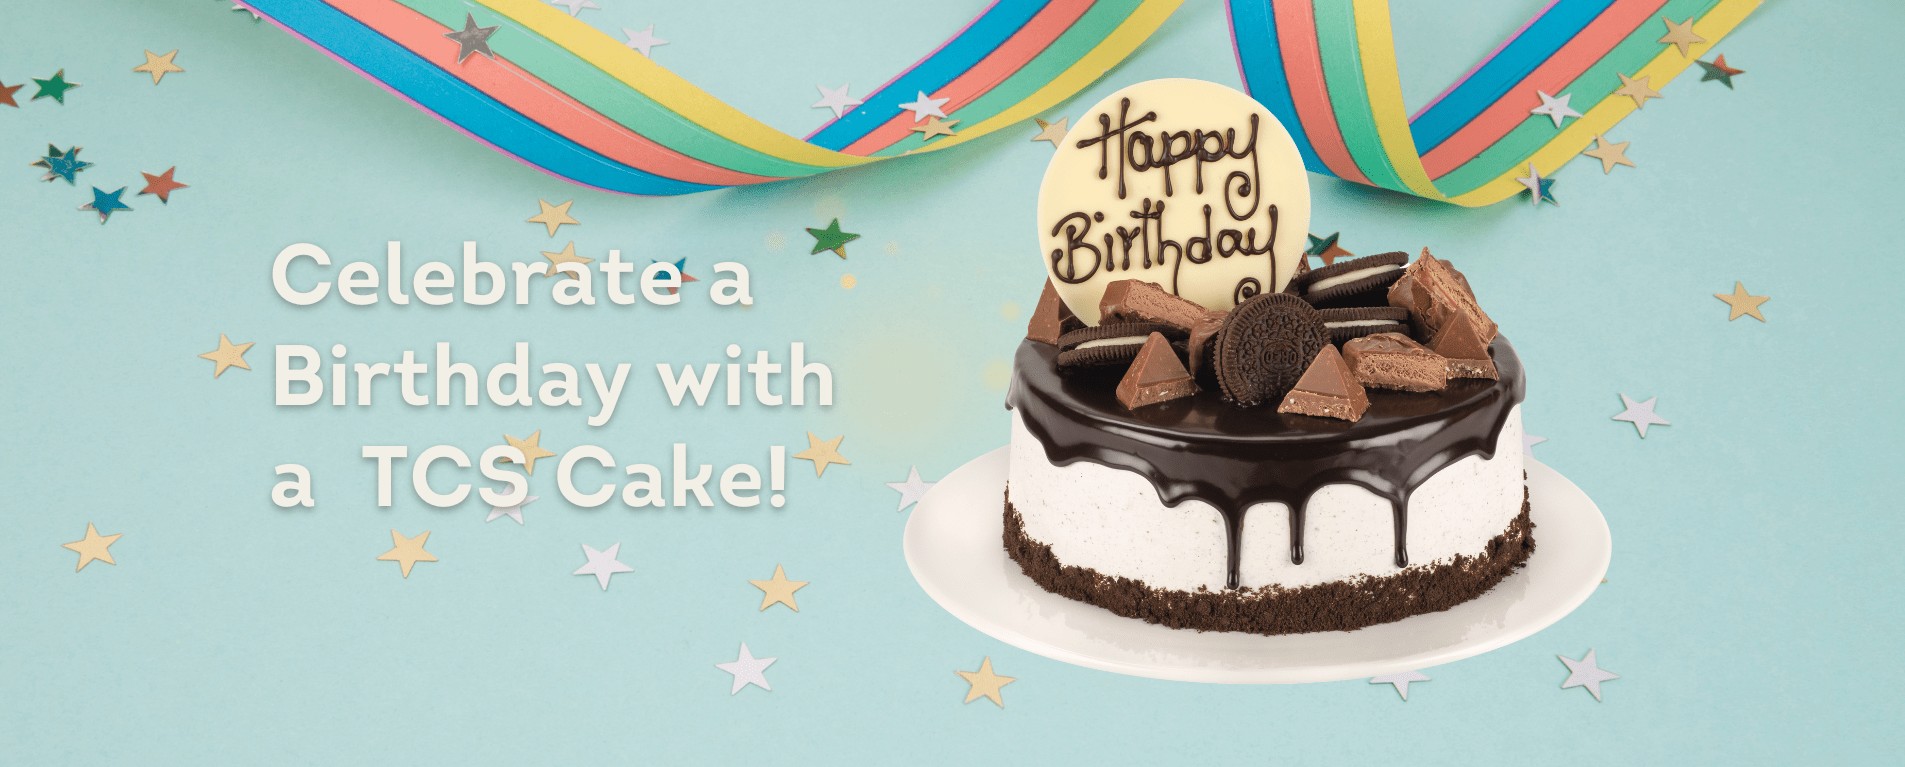 Celebrate a Birthday with a TCS cake!